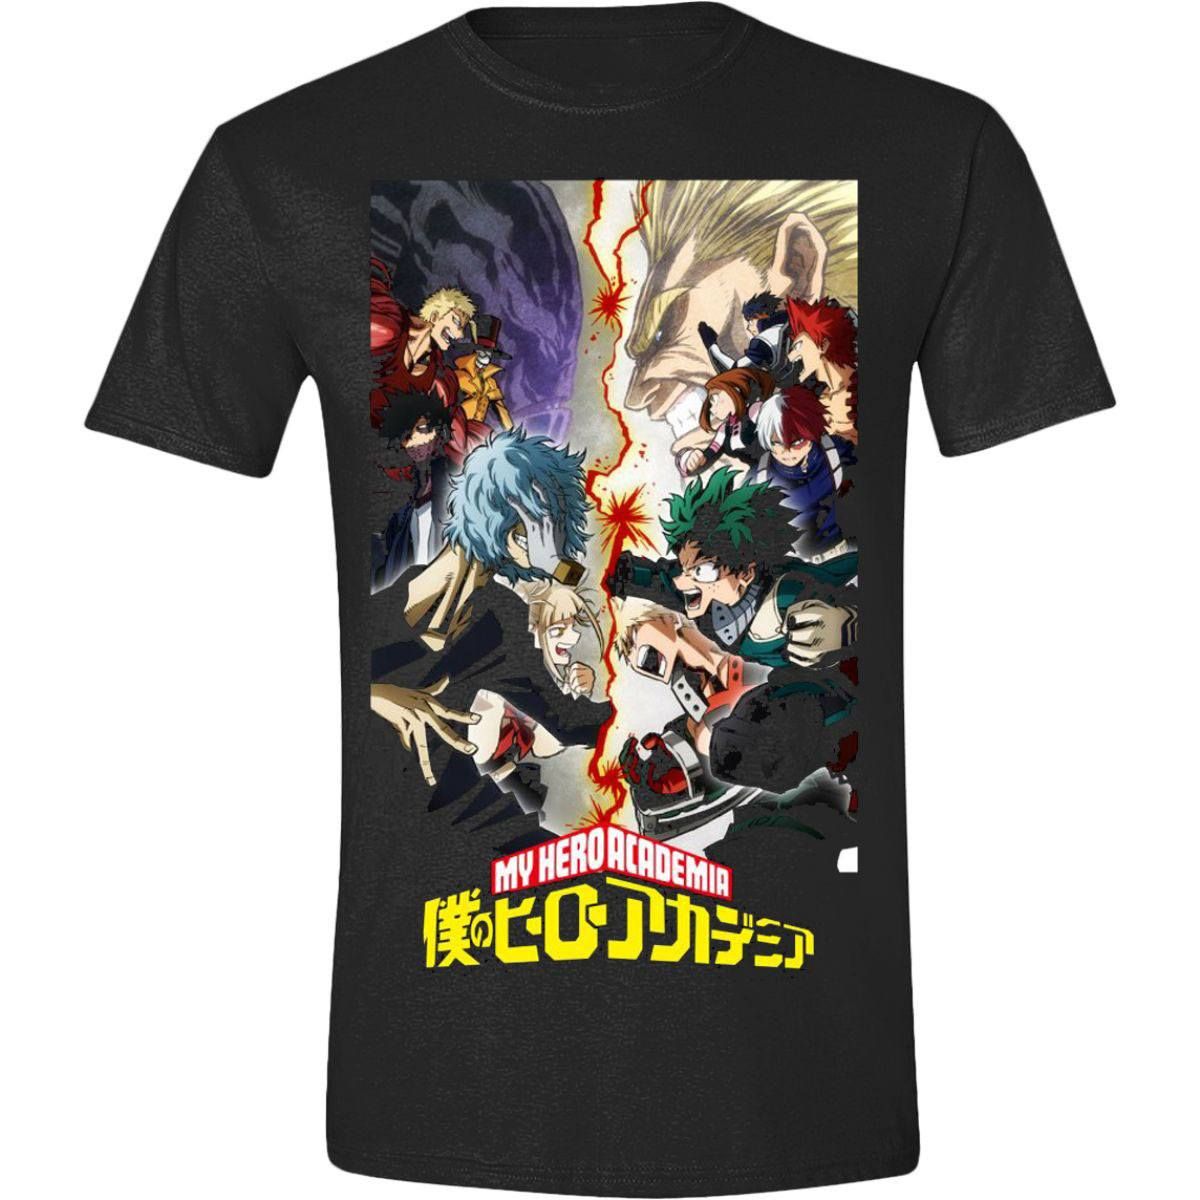 My Hero Academia T-Shirt Graphic Size M PCMerch